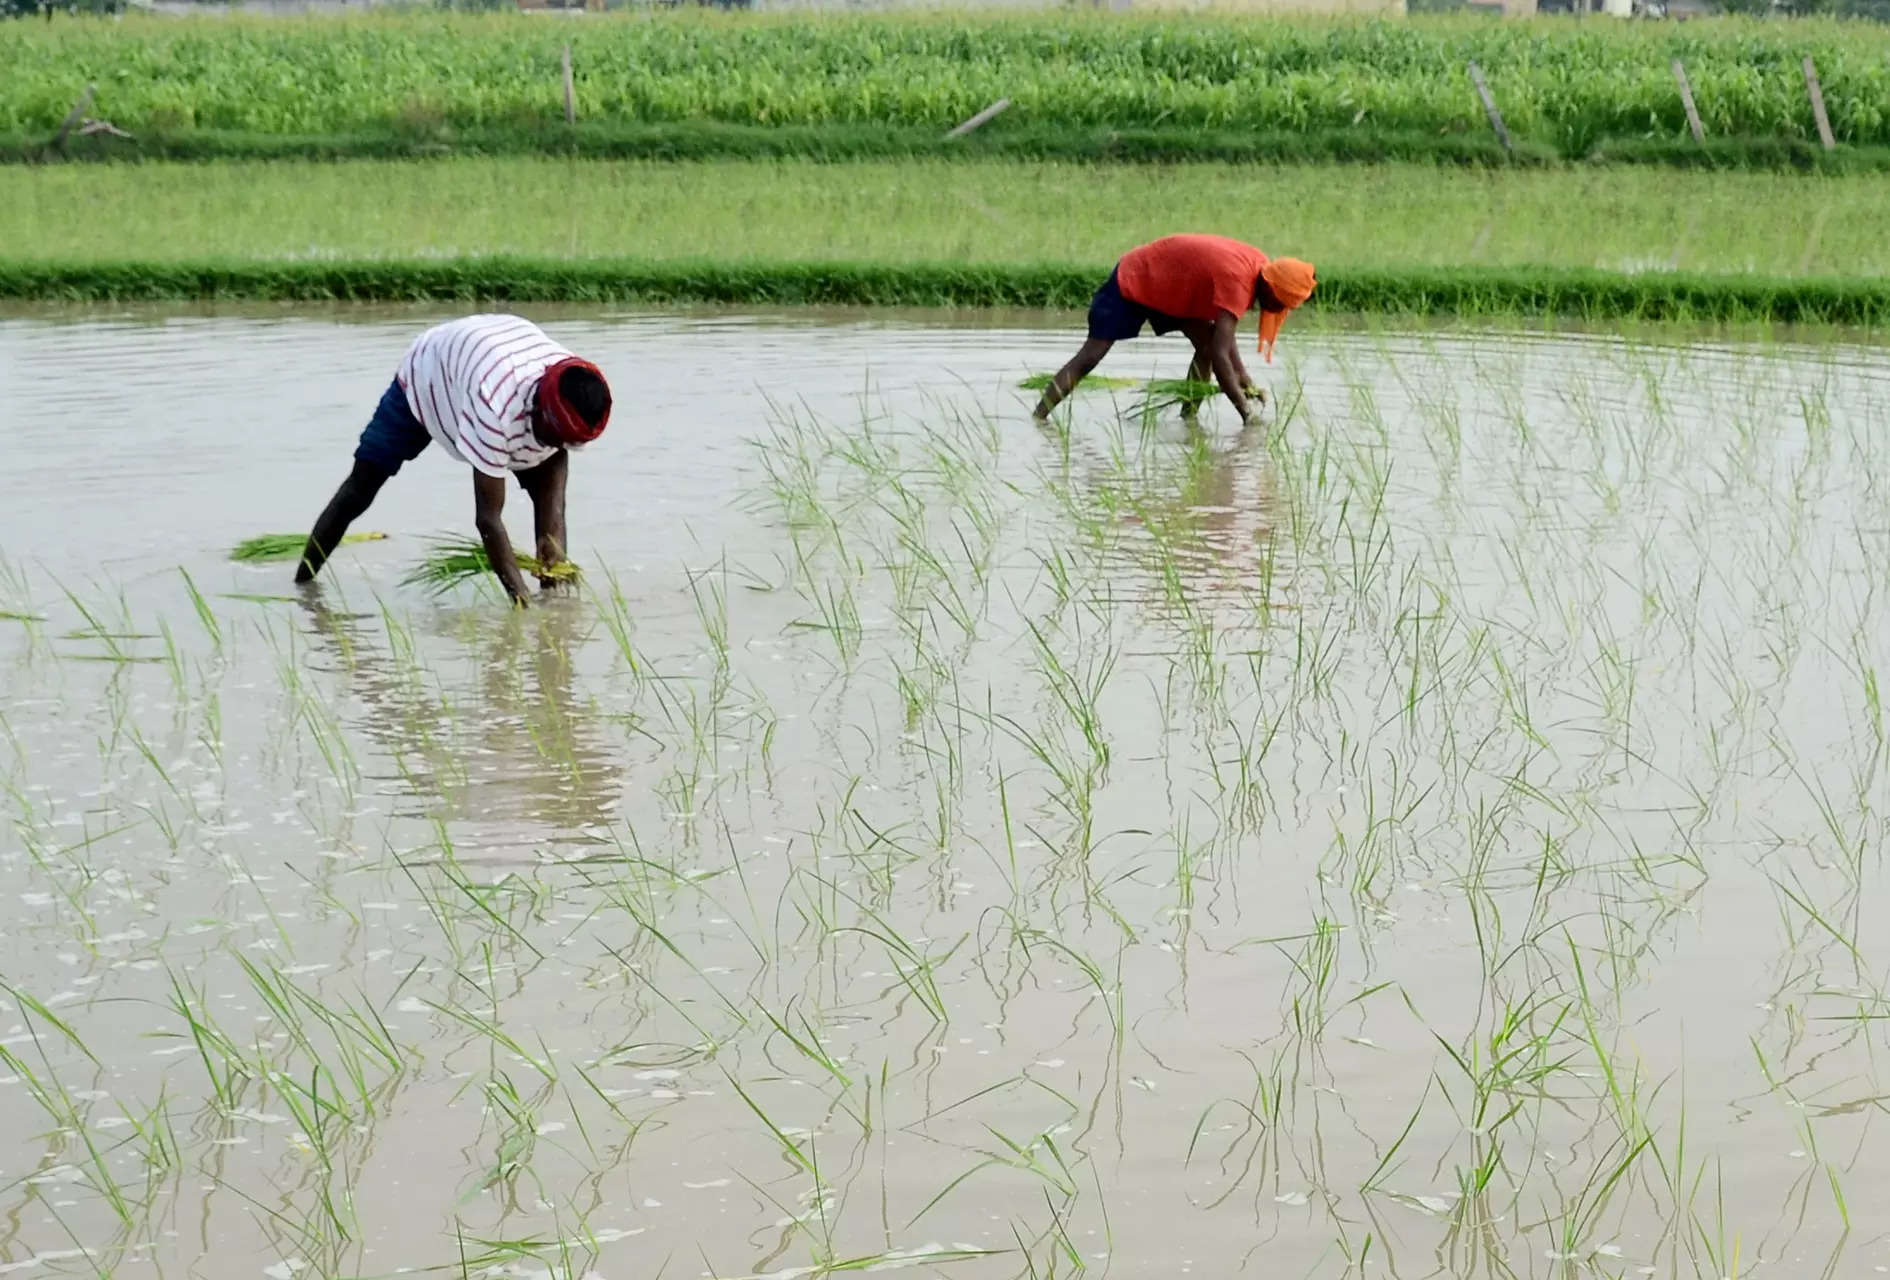 Farmers to get Rs 17,500/hectare for switching from paddy to other crops: Punjab Minister 